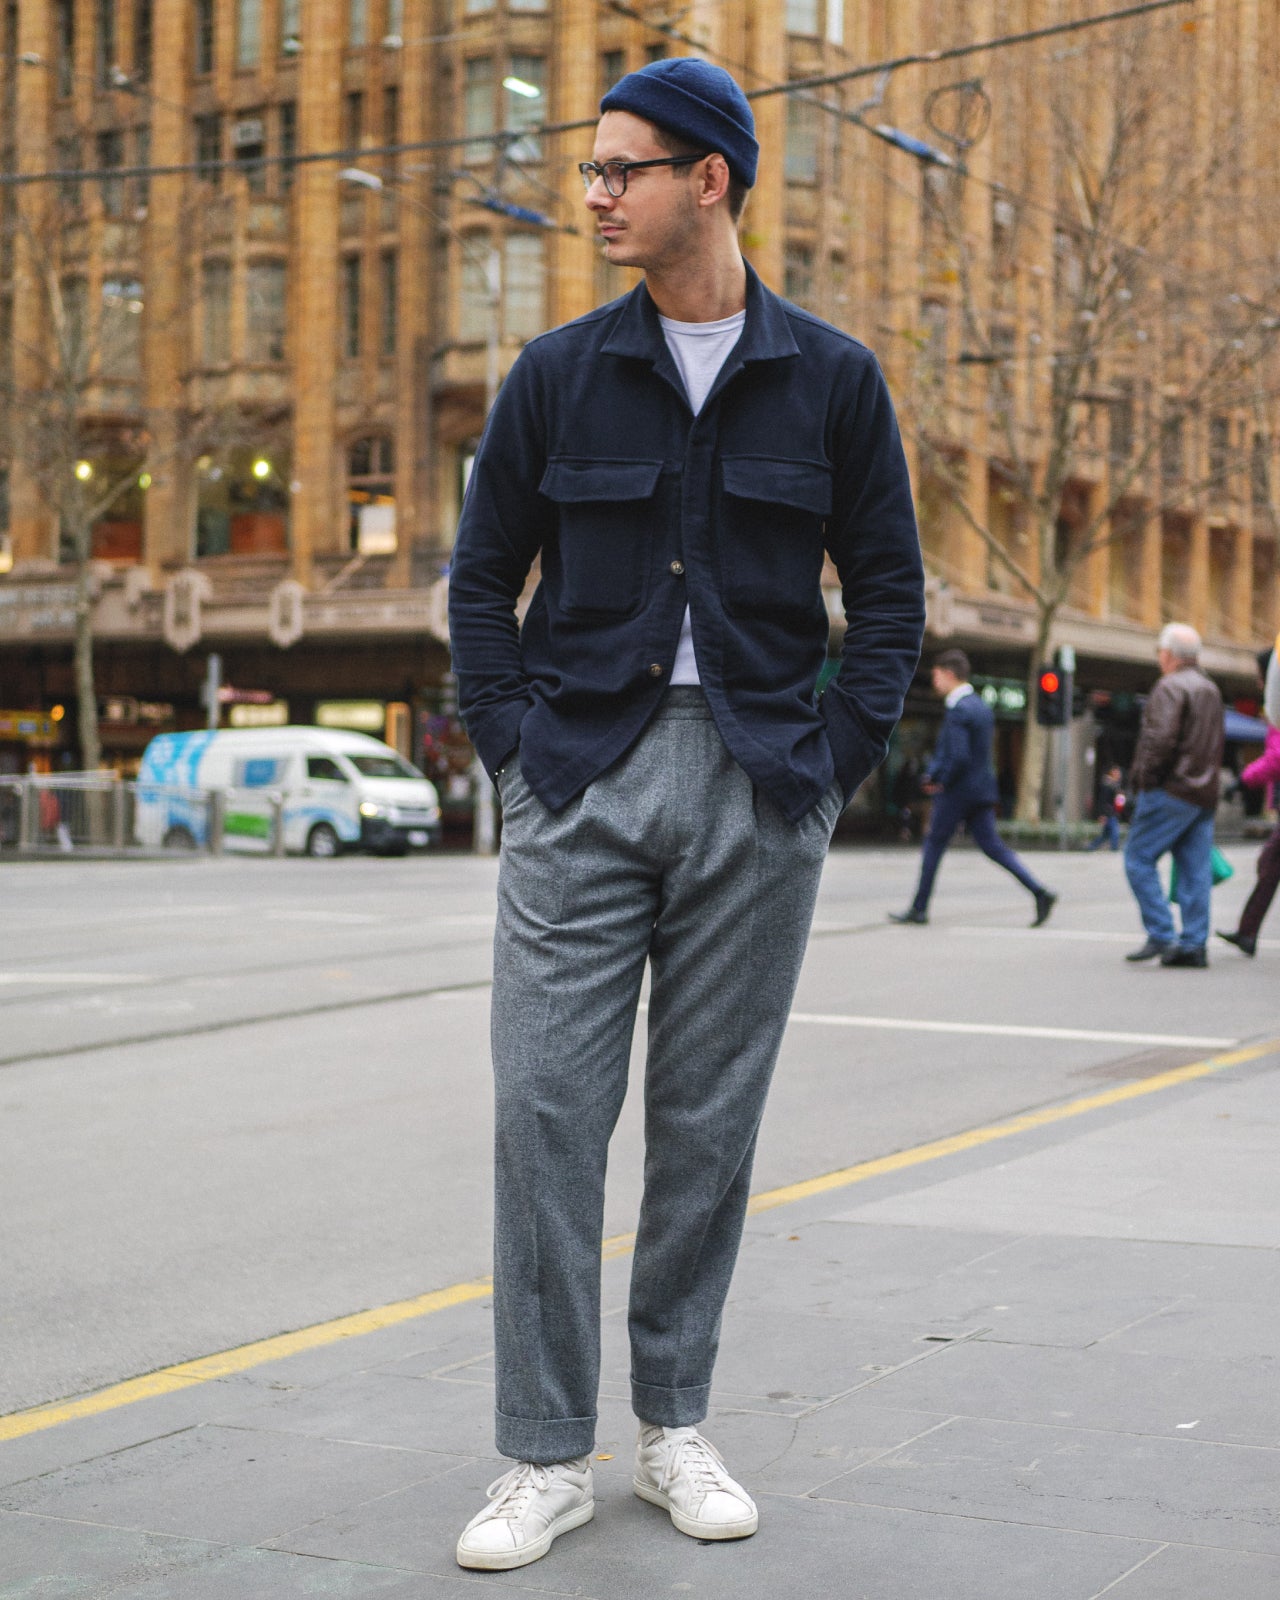 Outerwear | Made in Melbourne – Informale